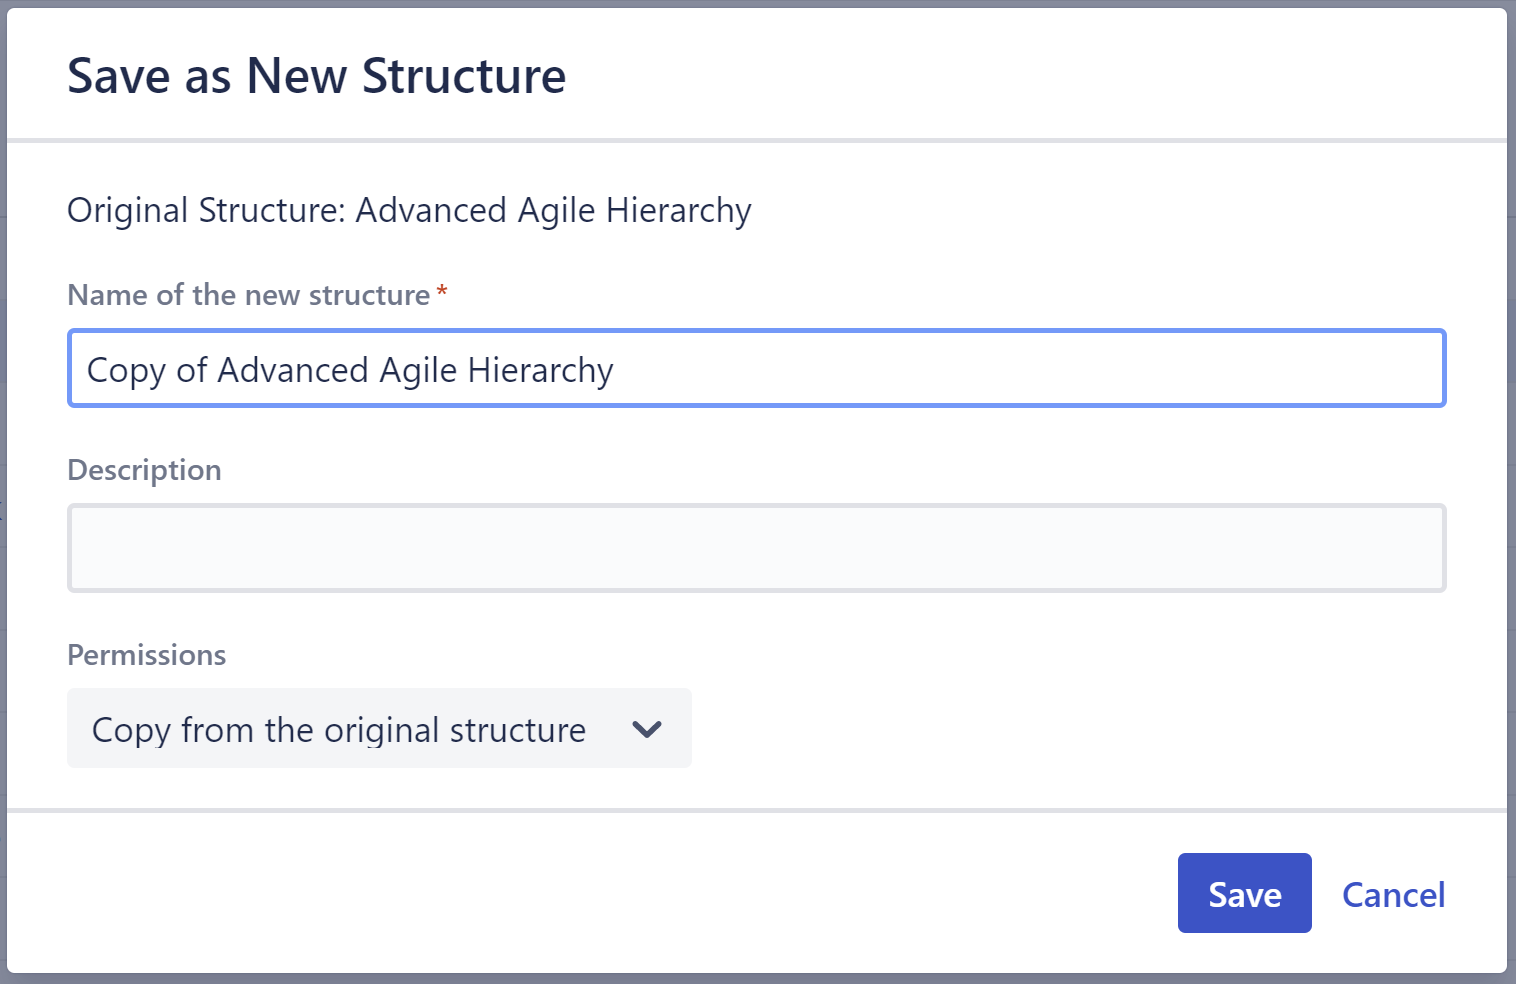 Save as New Structure settings